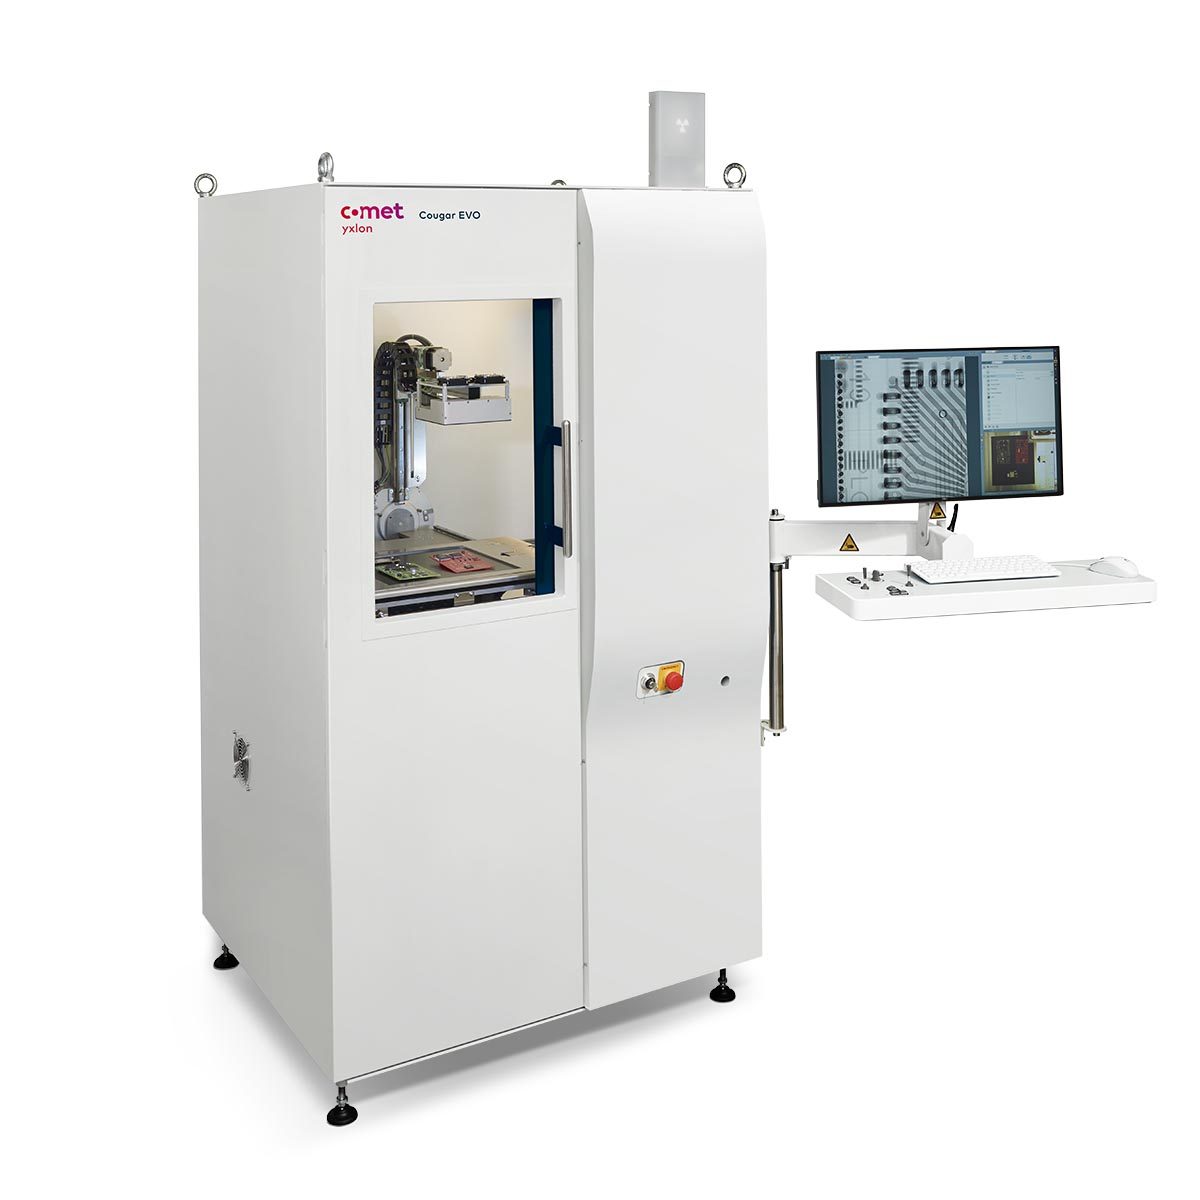 Coment Yxlon Cougar EVO X-ray inspection system